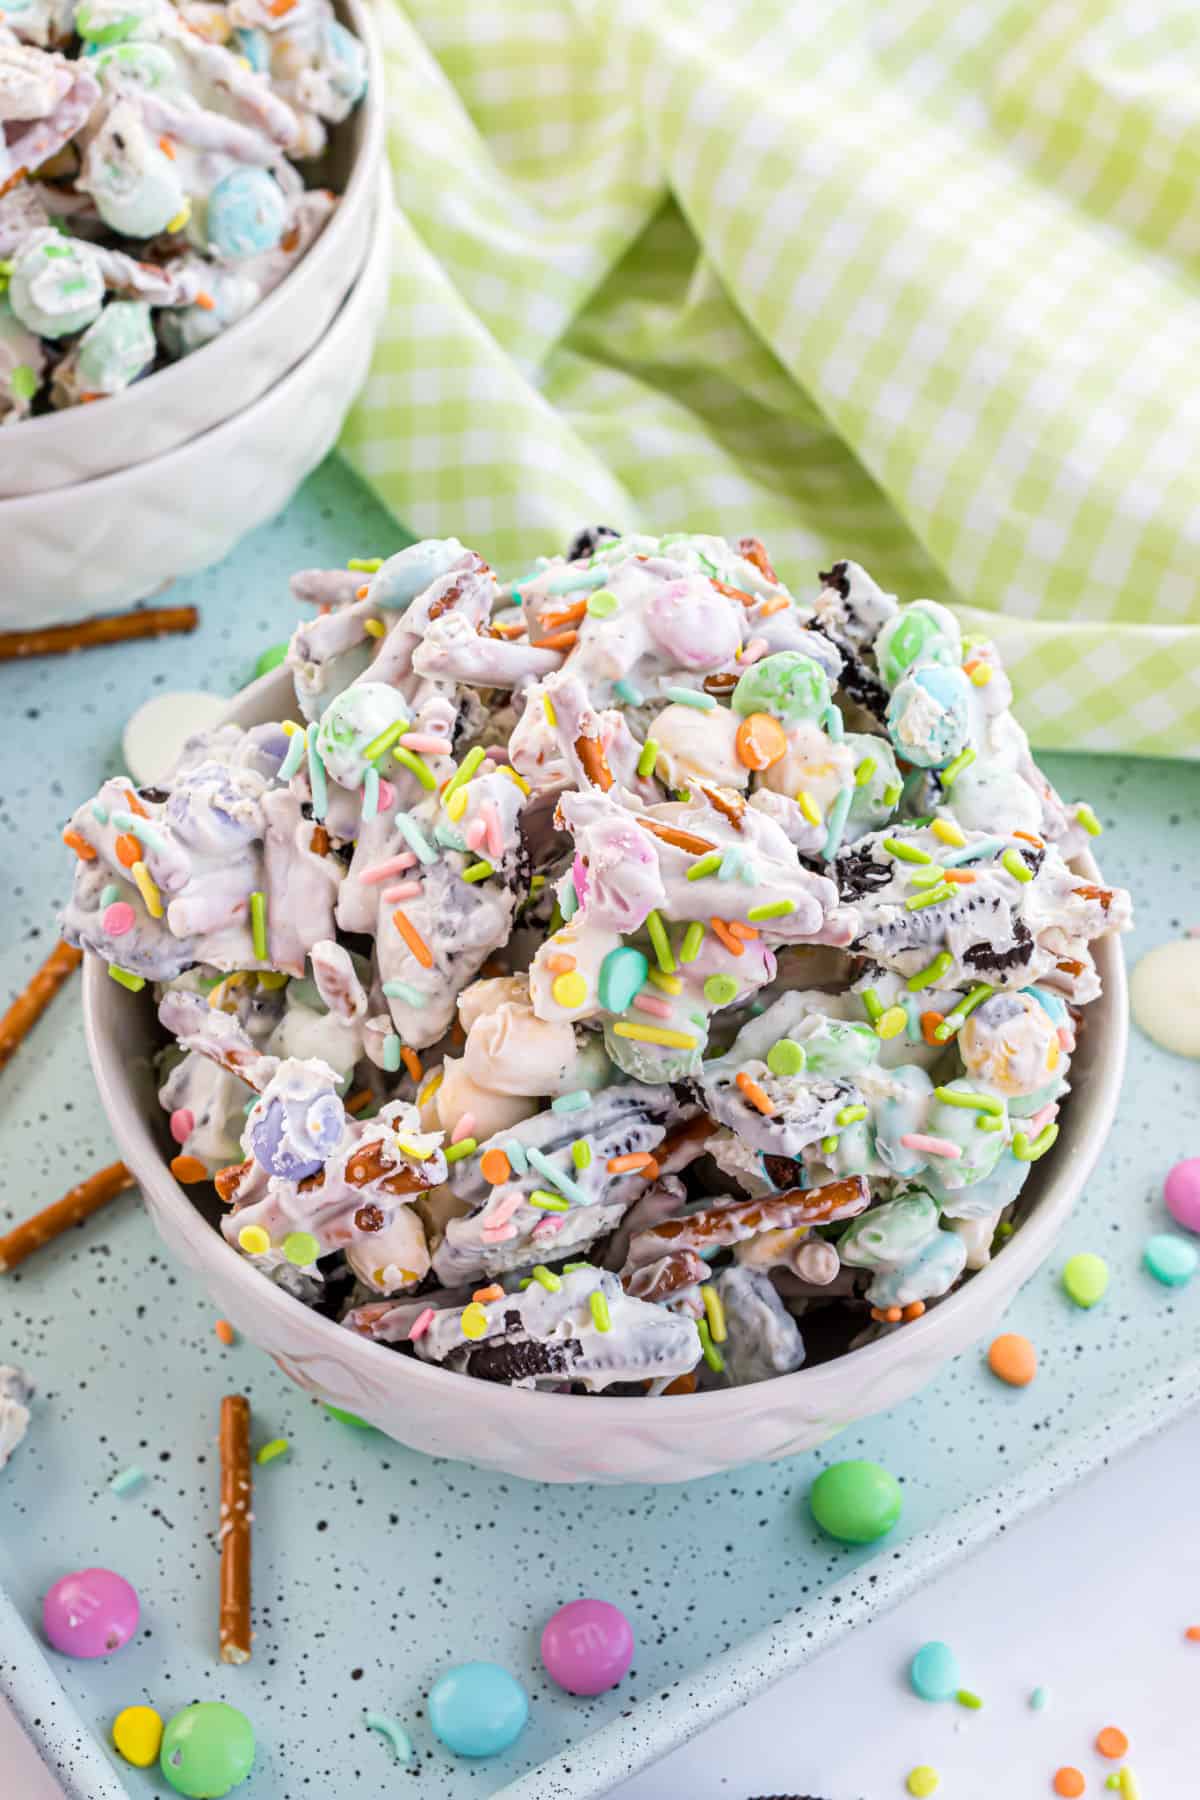 Bunny chow candy in a bowl with pastel sprinkles.